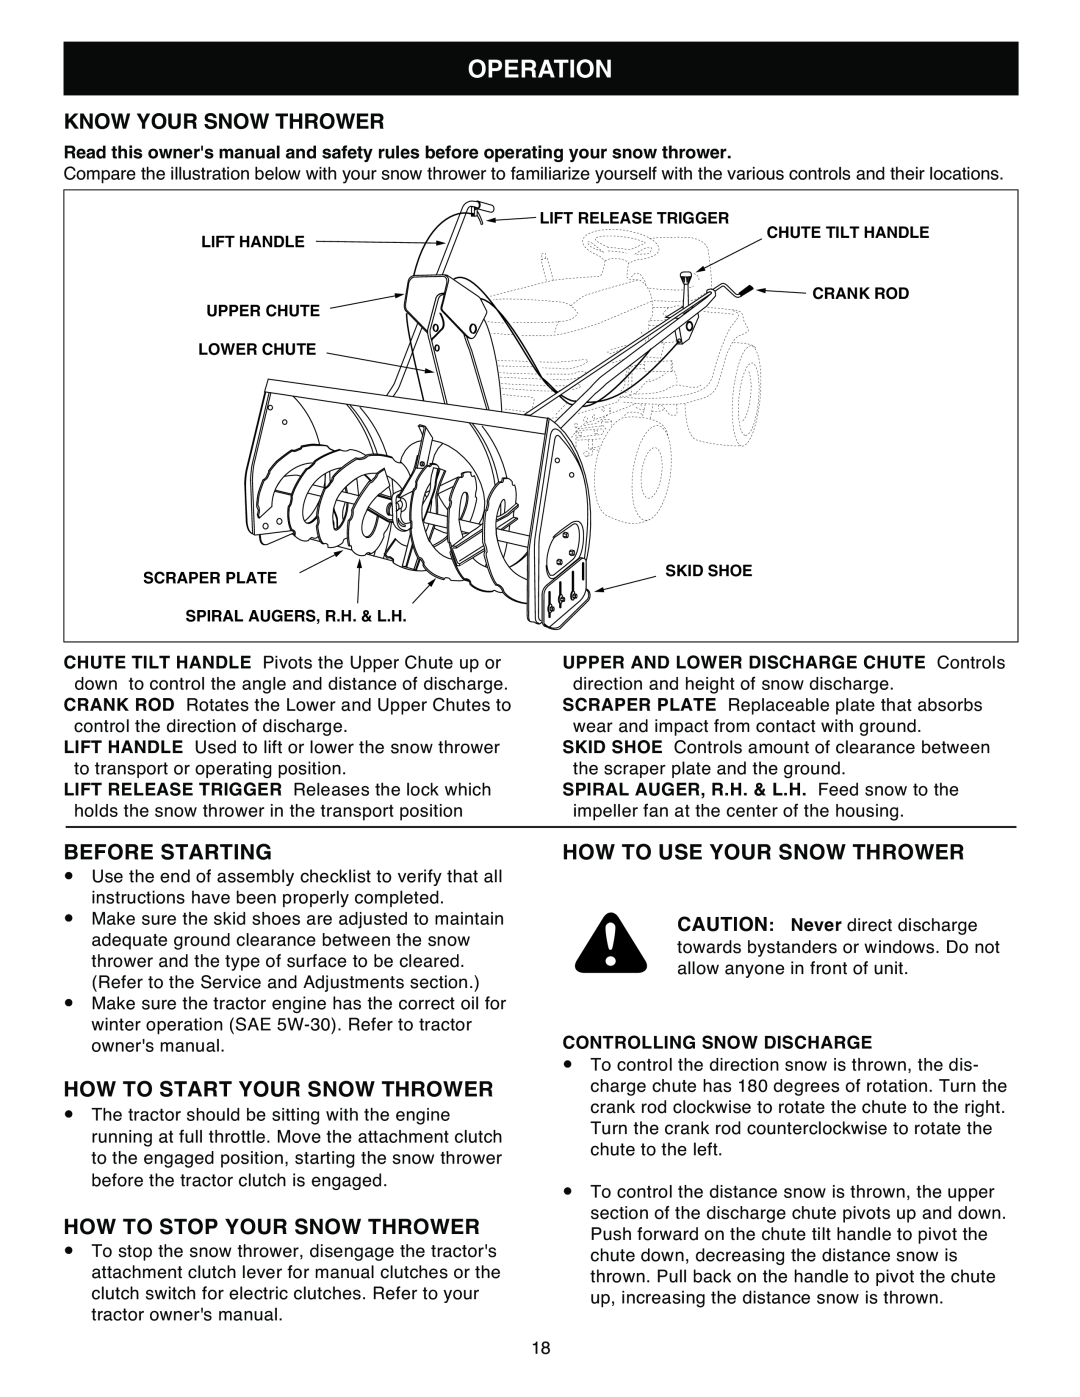 Sears 486.248392 owner manual Operation, Know Your Snow Thrower, Before Starting, How To Start Your Snow Thrower 